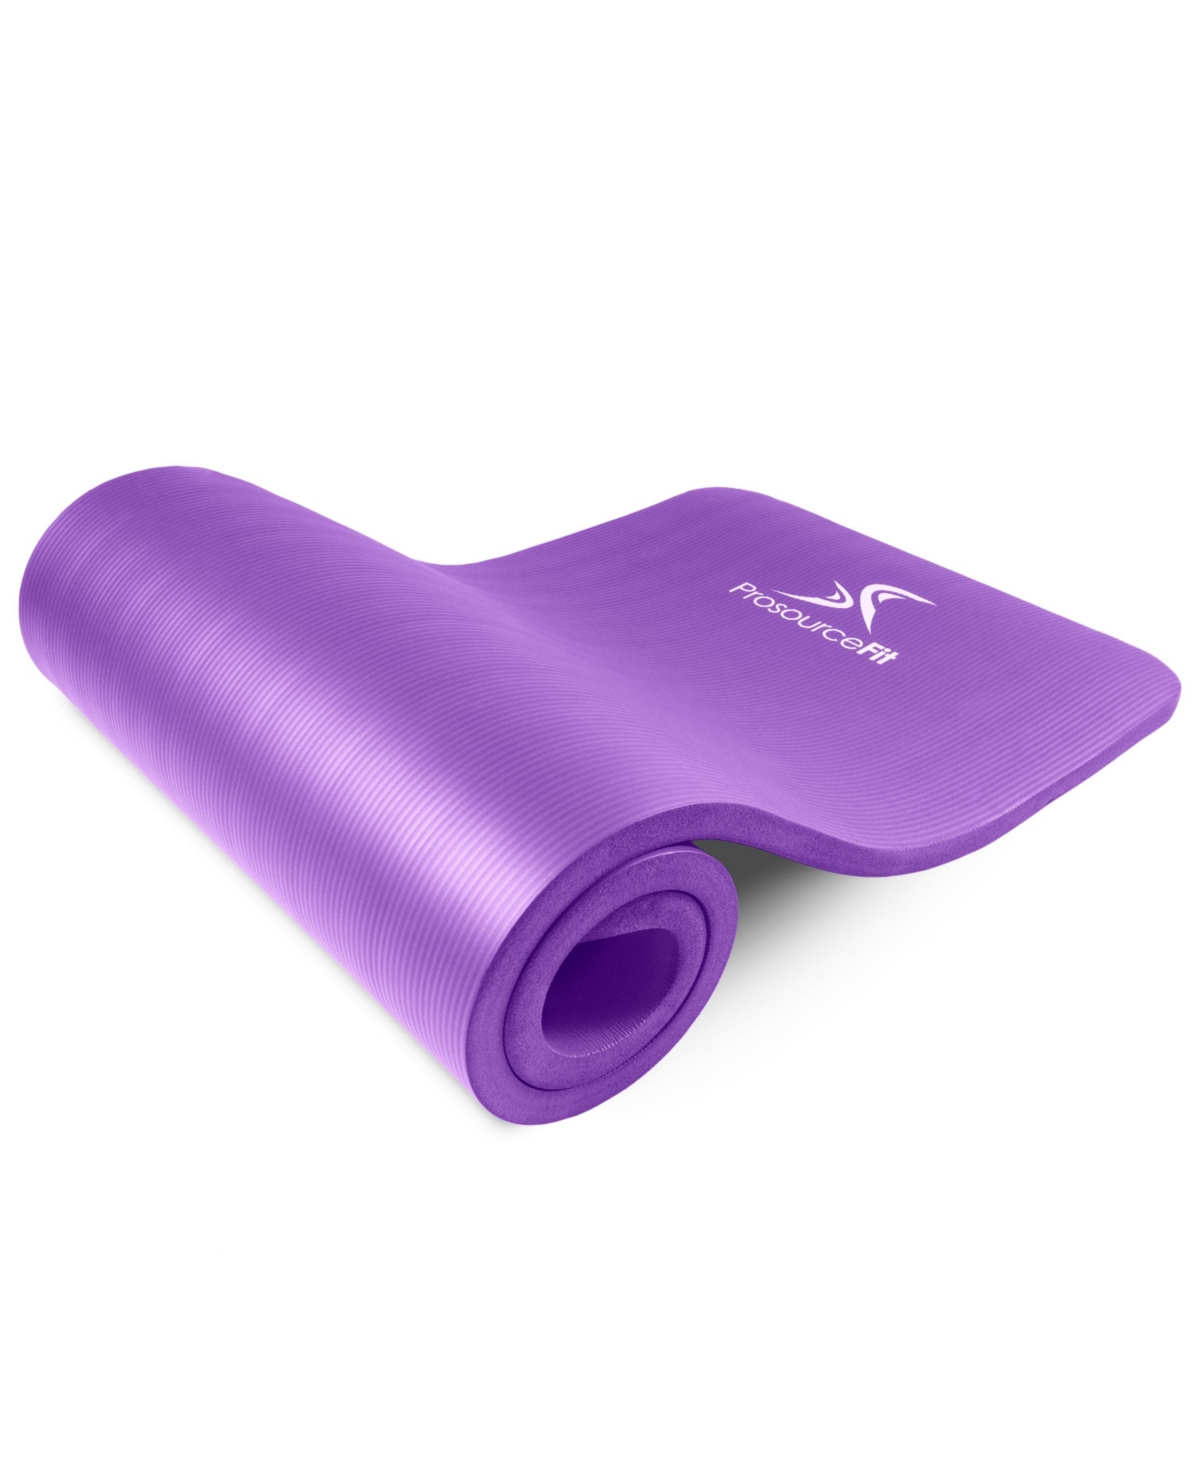 Extra Thick Yoga and Pilates Mat with Sling, 1" - Purple